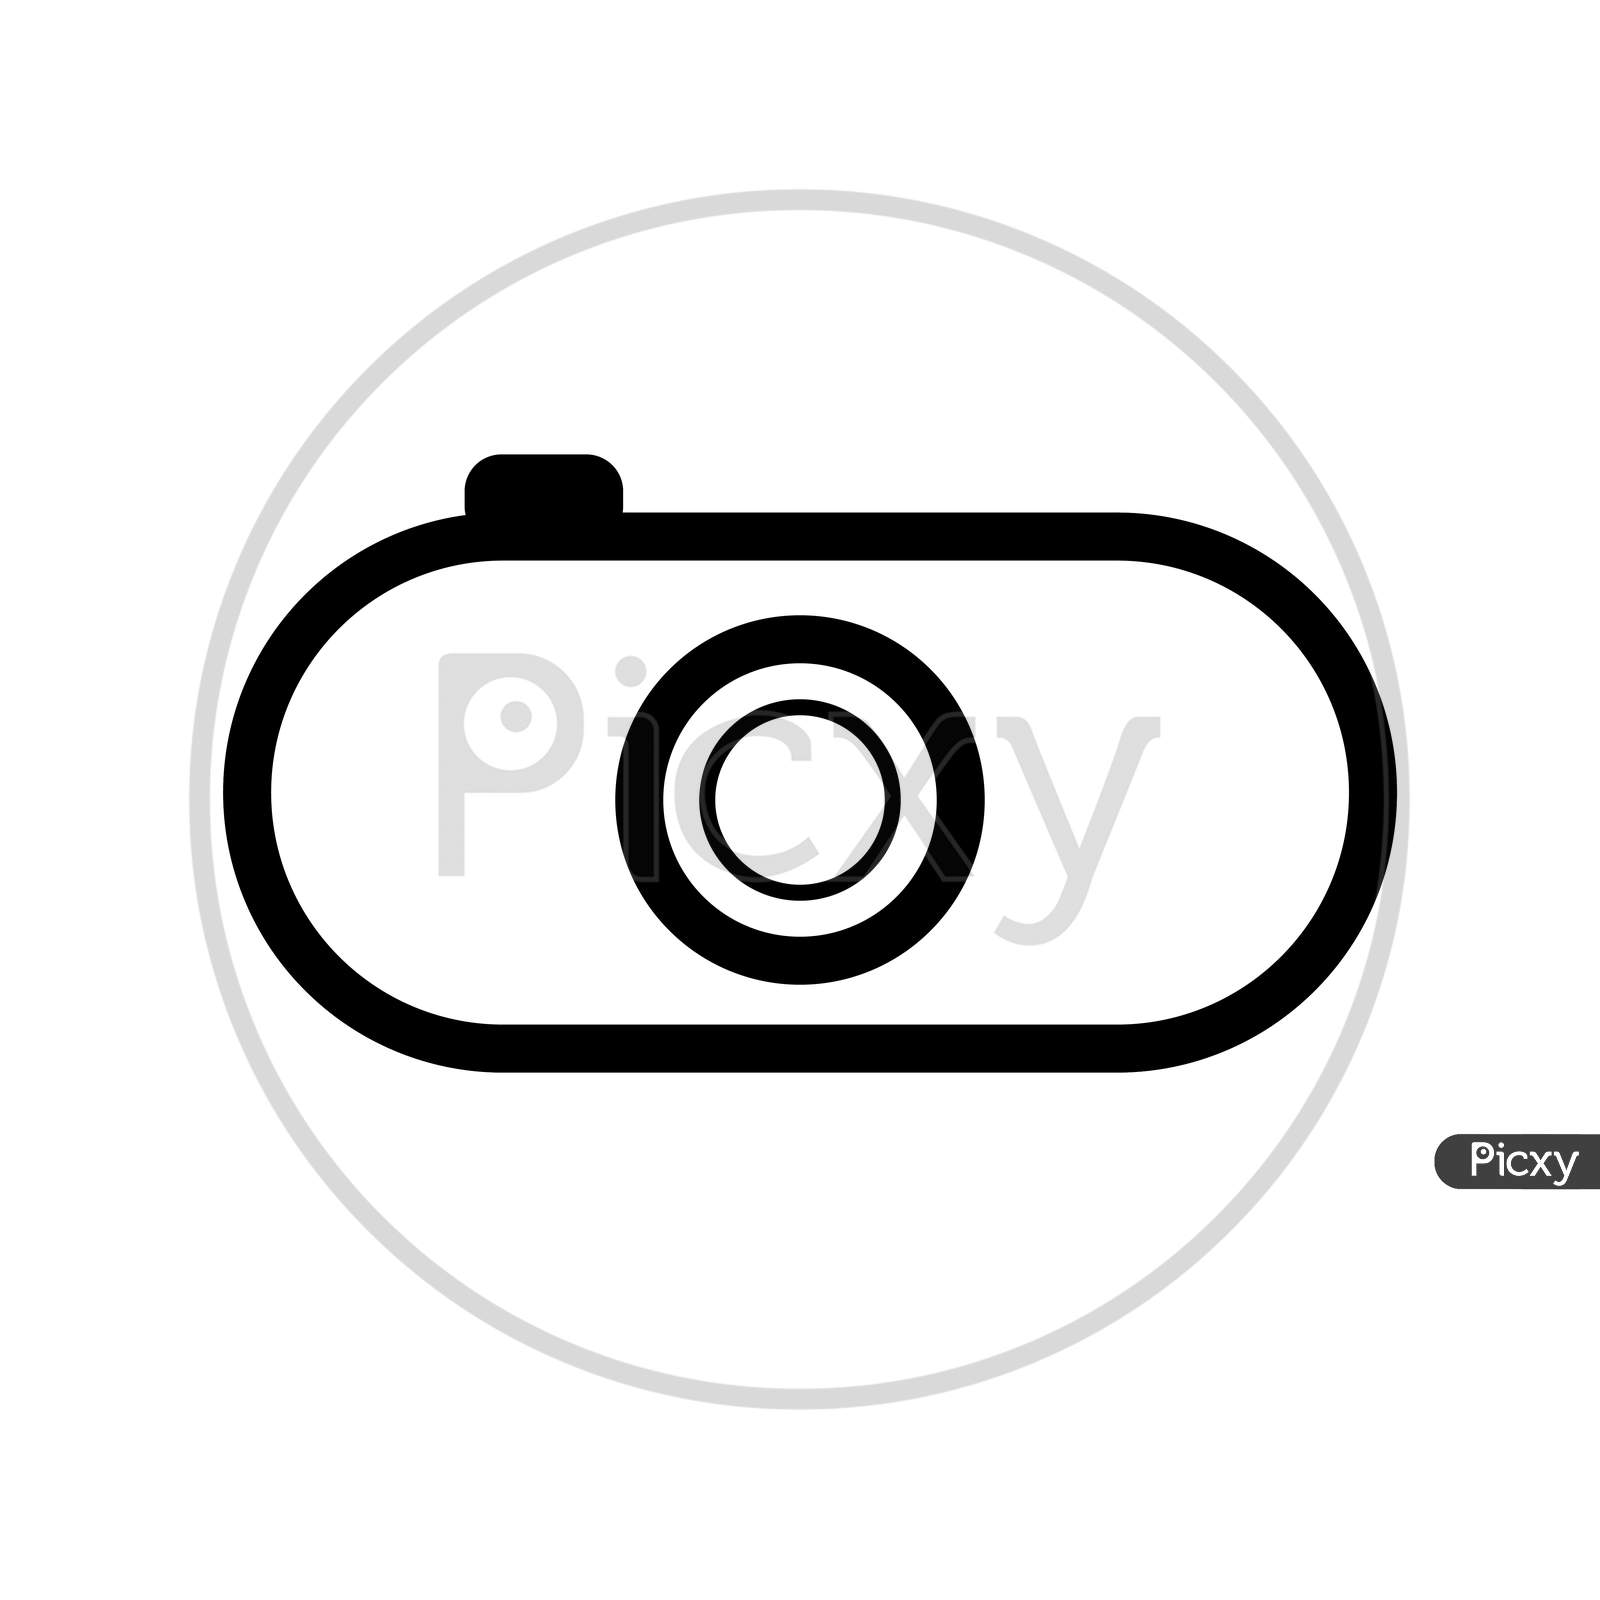 Camera Icon In Rendy Flat Style. Camera Symbol For Your Web Site Design, Logo, App, Ui.